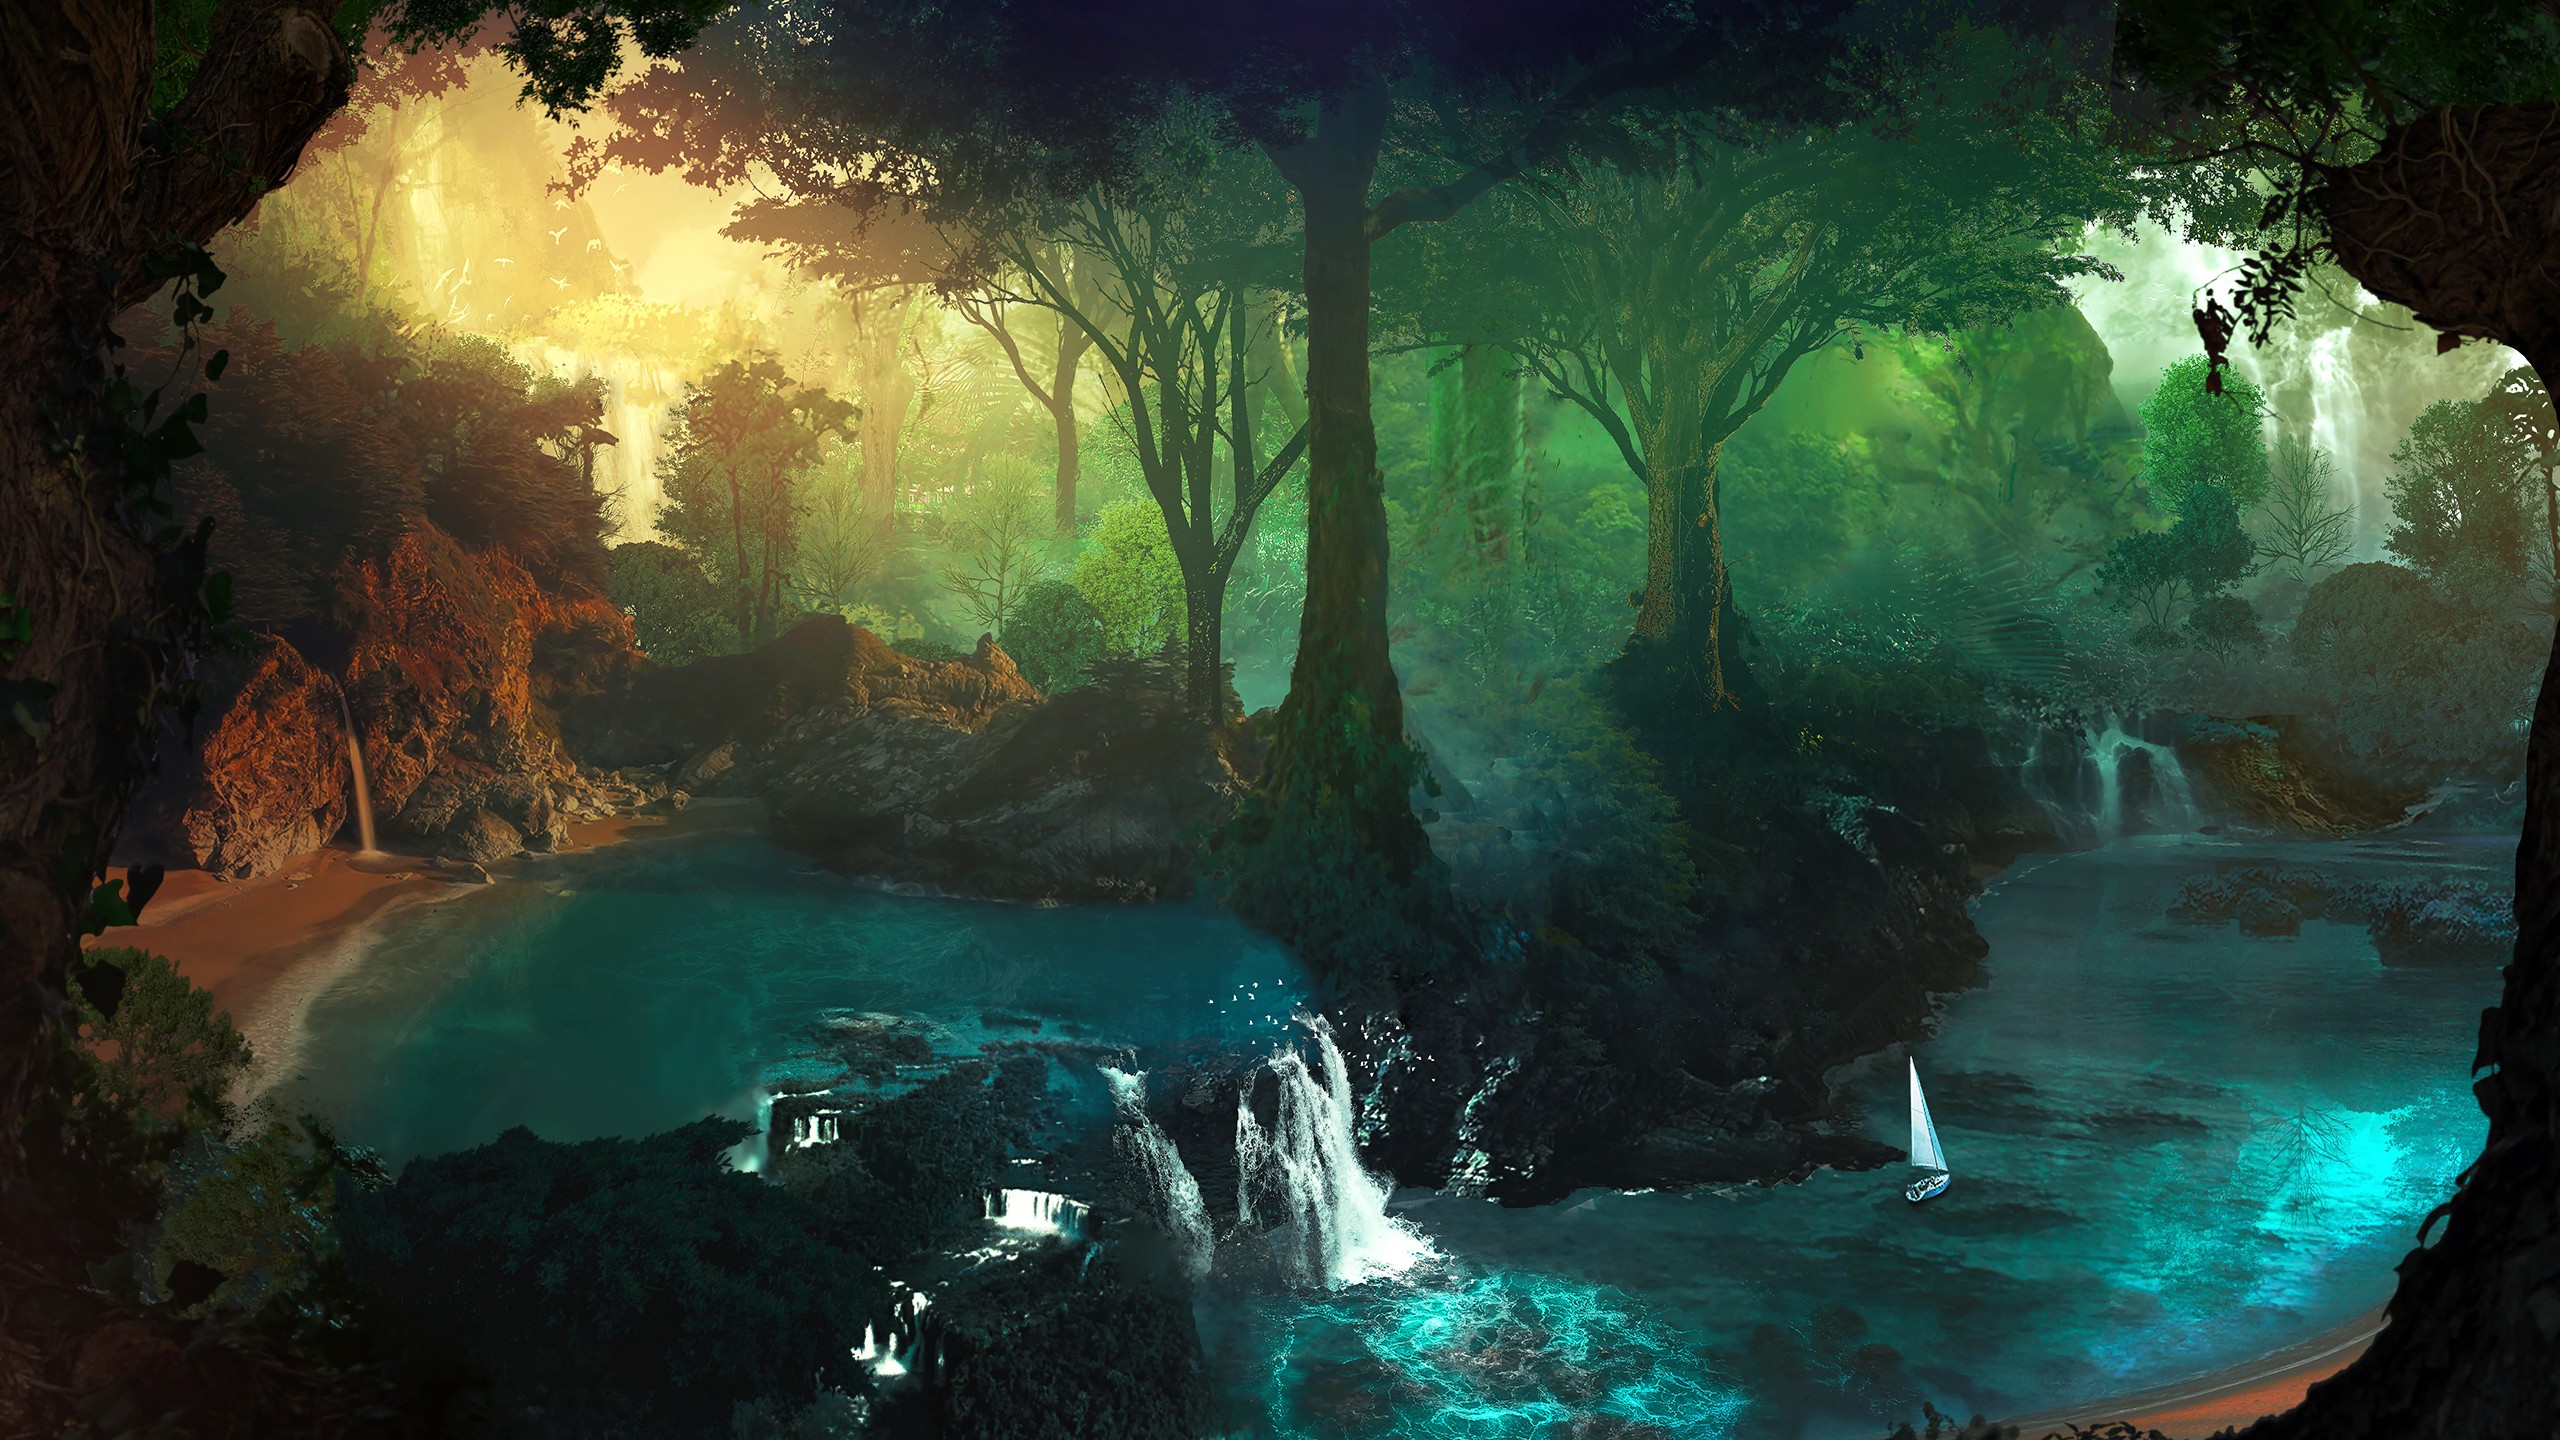 General 2560x1440 forest trees artwork nature water t1na Desktopography